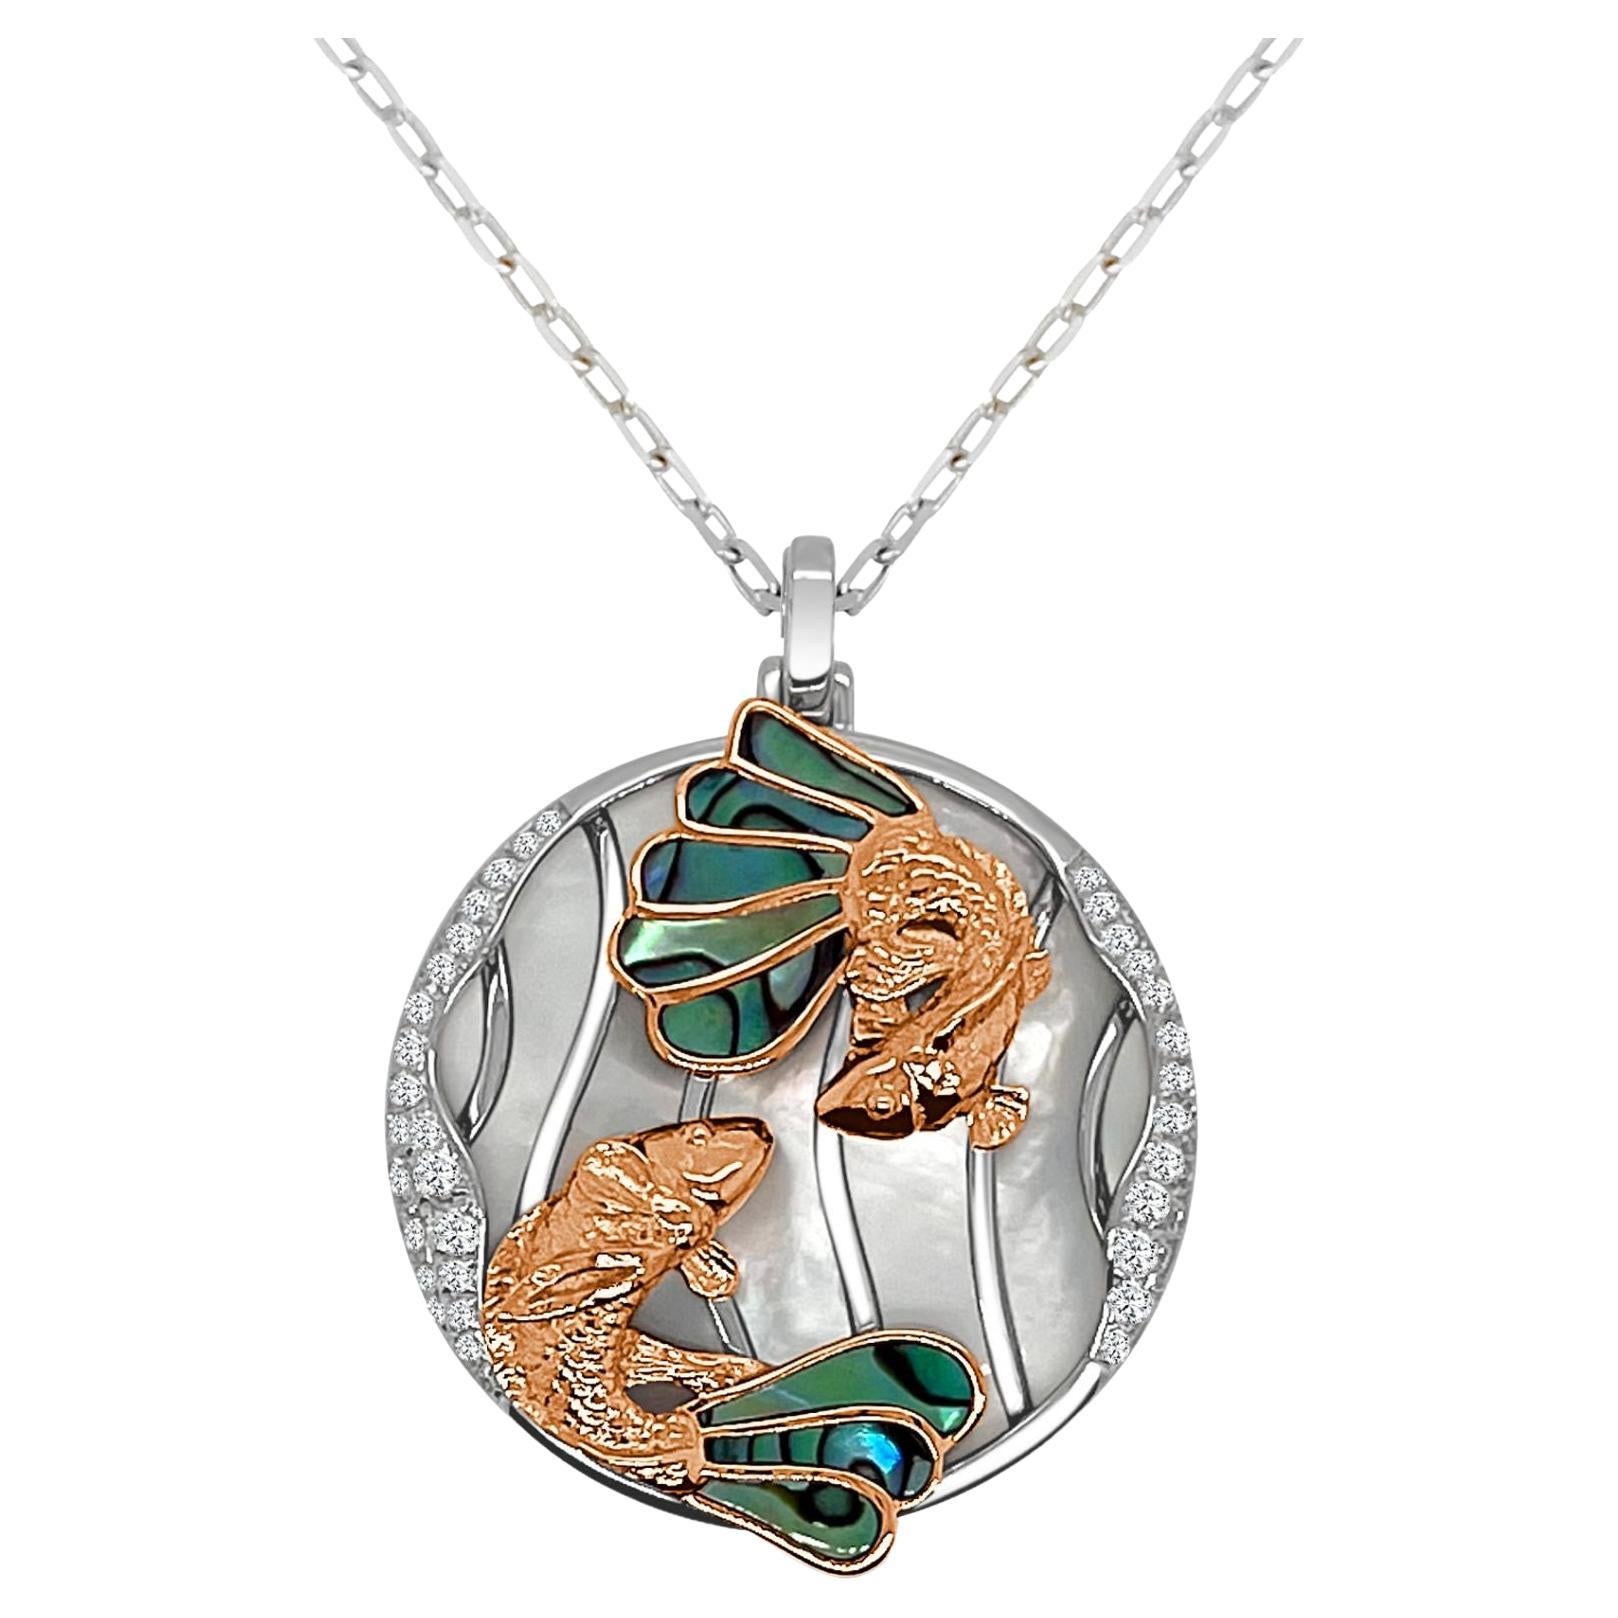 Frederic Sage Medium Koi Pendant with Abalone and White Mother of Pearl Pendant For Sale